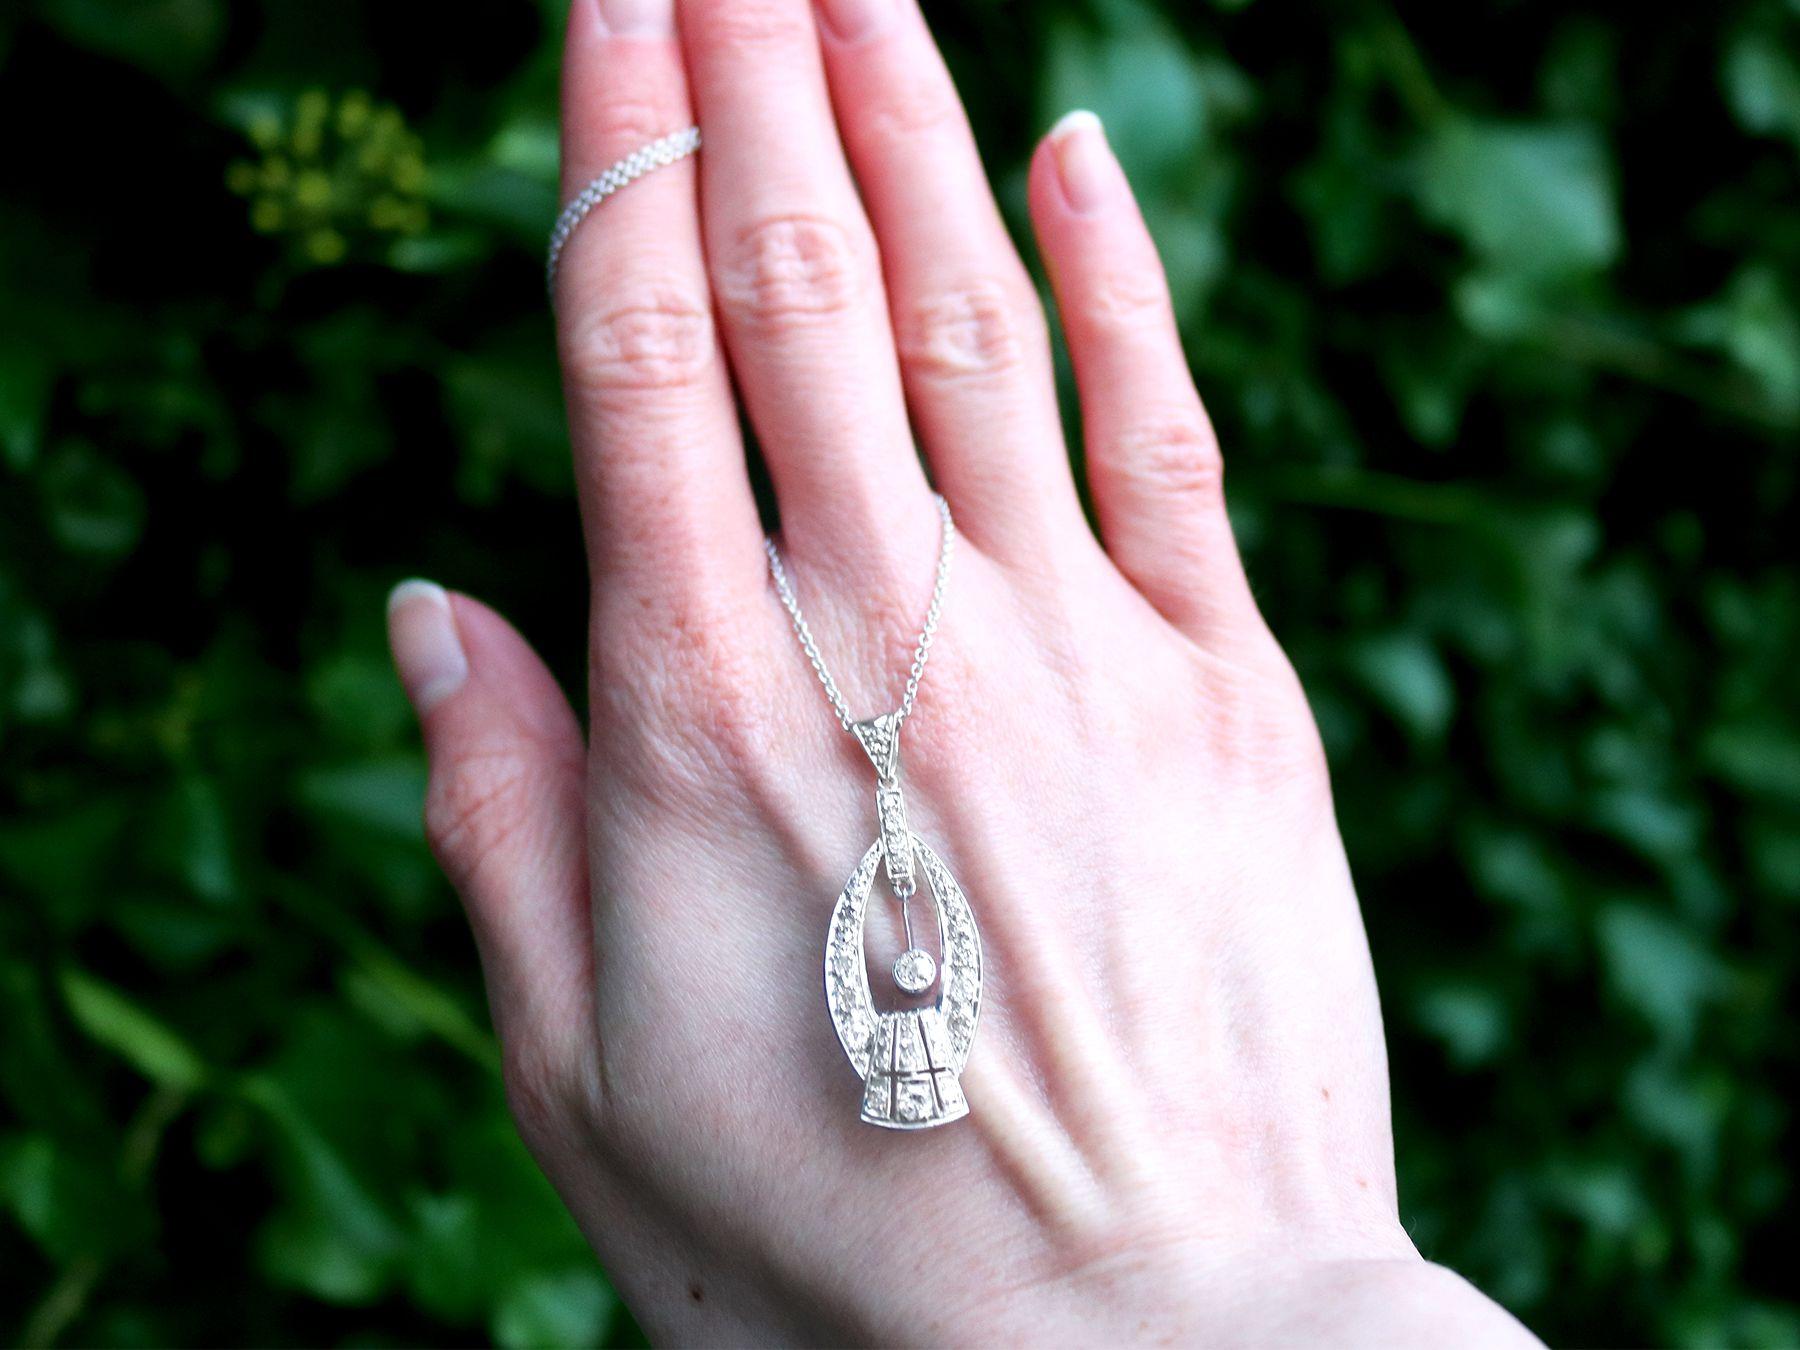 A fine and impressive antique Art Deco 0.88 carat diamond and platinum pendant; part of our diverse antique jewellery and estate jewelry collections.

This fine and impressive antique diamond pendant has been crafted in platinum.

The pierced